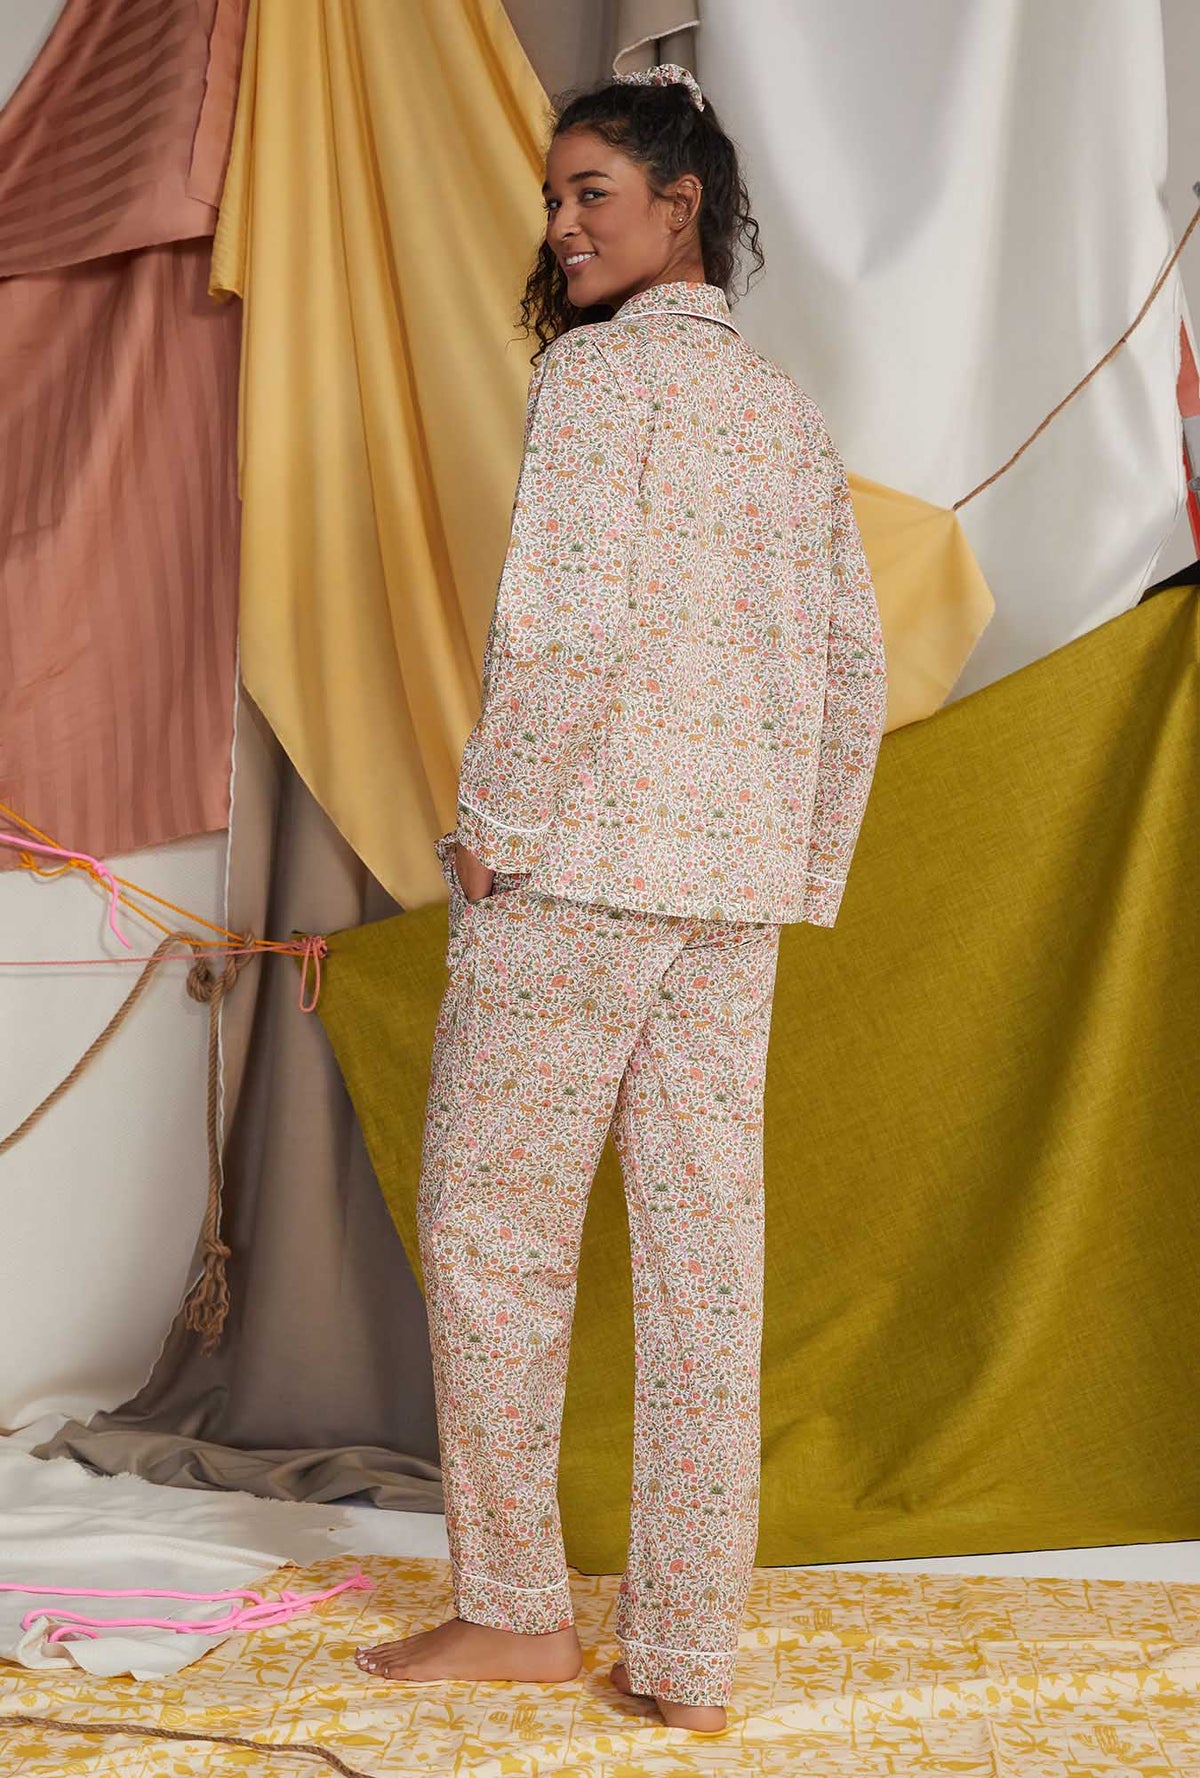 A lady wearing multi color long sleeve tana lawn classic pj set with imran print.